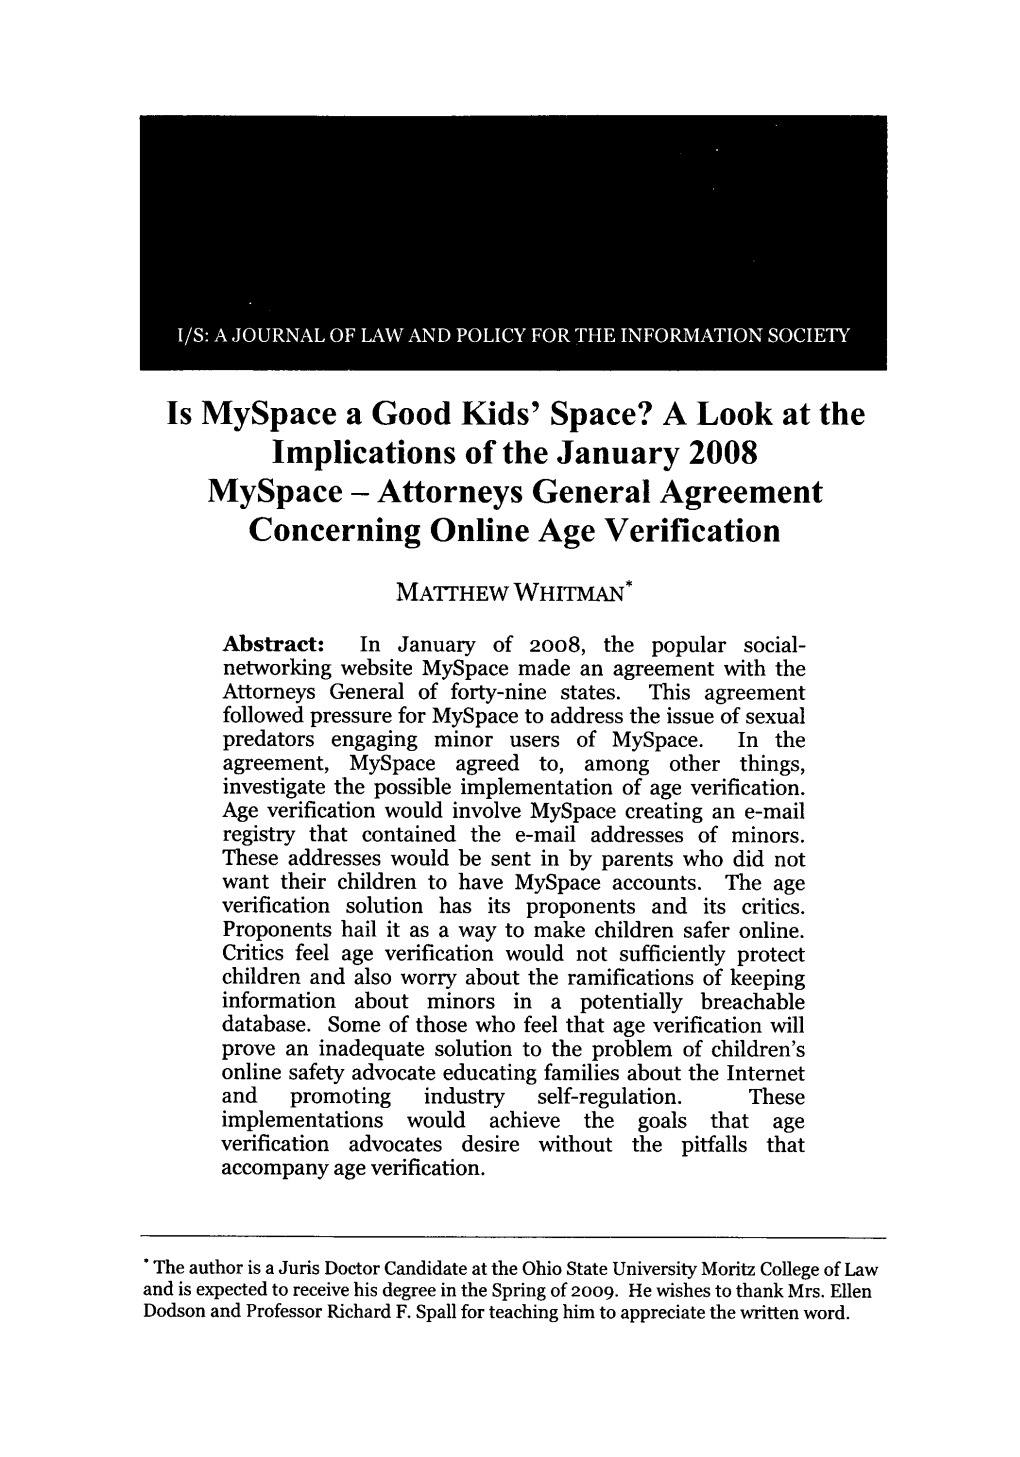 A Look at the Implications of the January 2008 Myspace - Attorneys General Agreement Concerning Online Age Verification